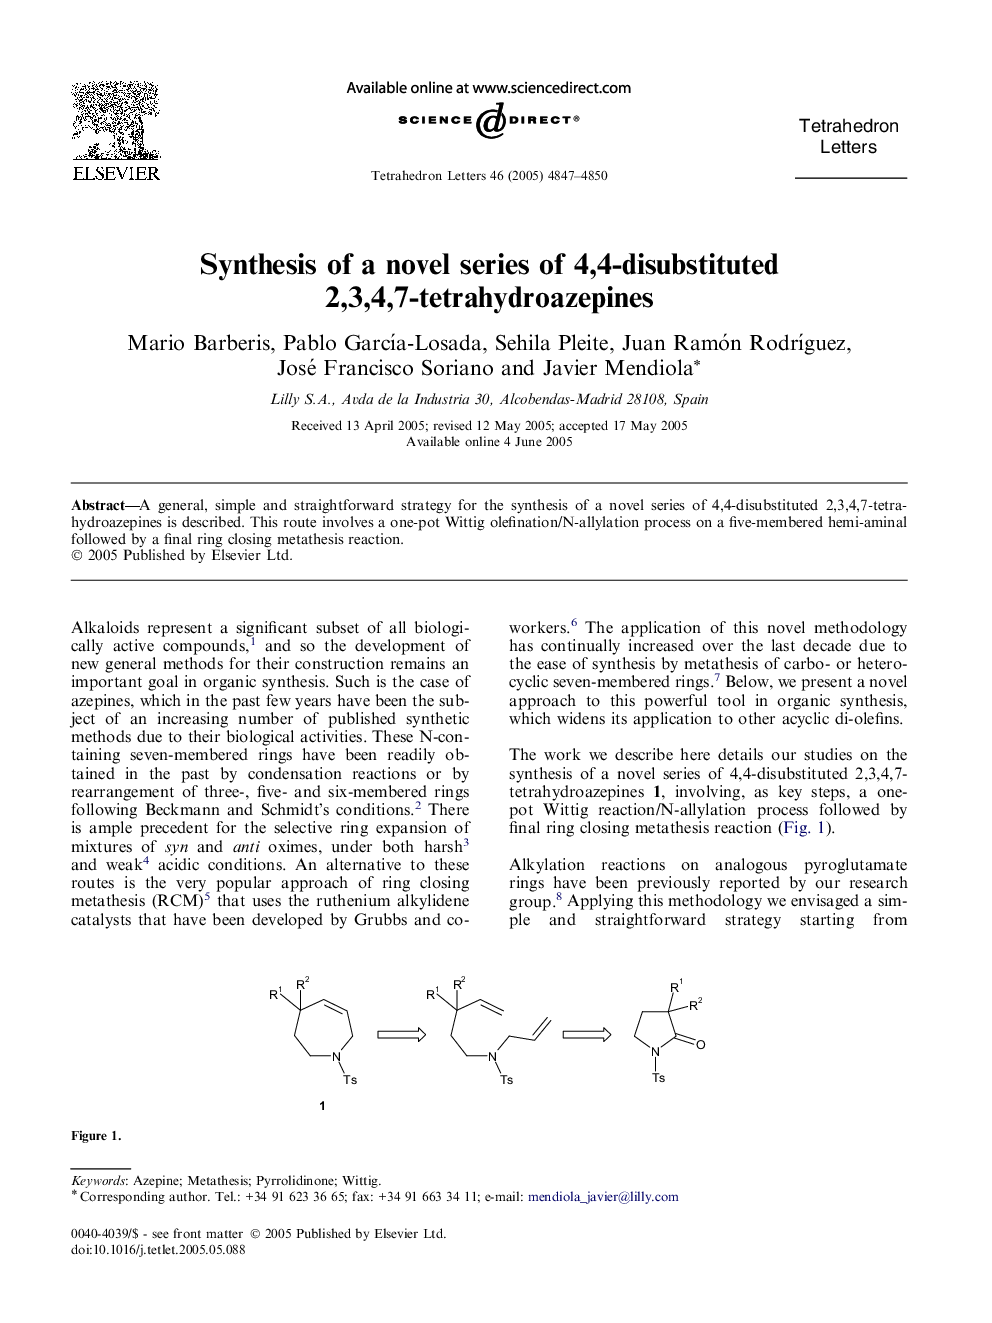 Synthesis of a novel series of 4,4-disubstituted 2,3,4,7-tetrahydroazepines